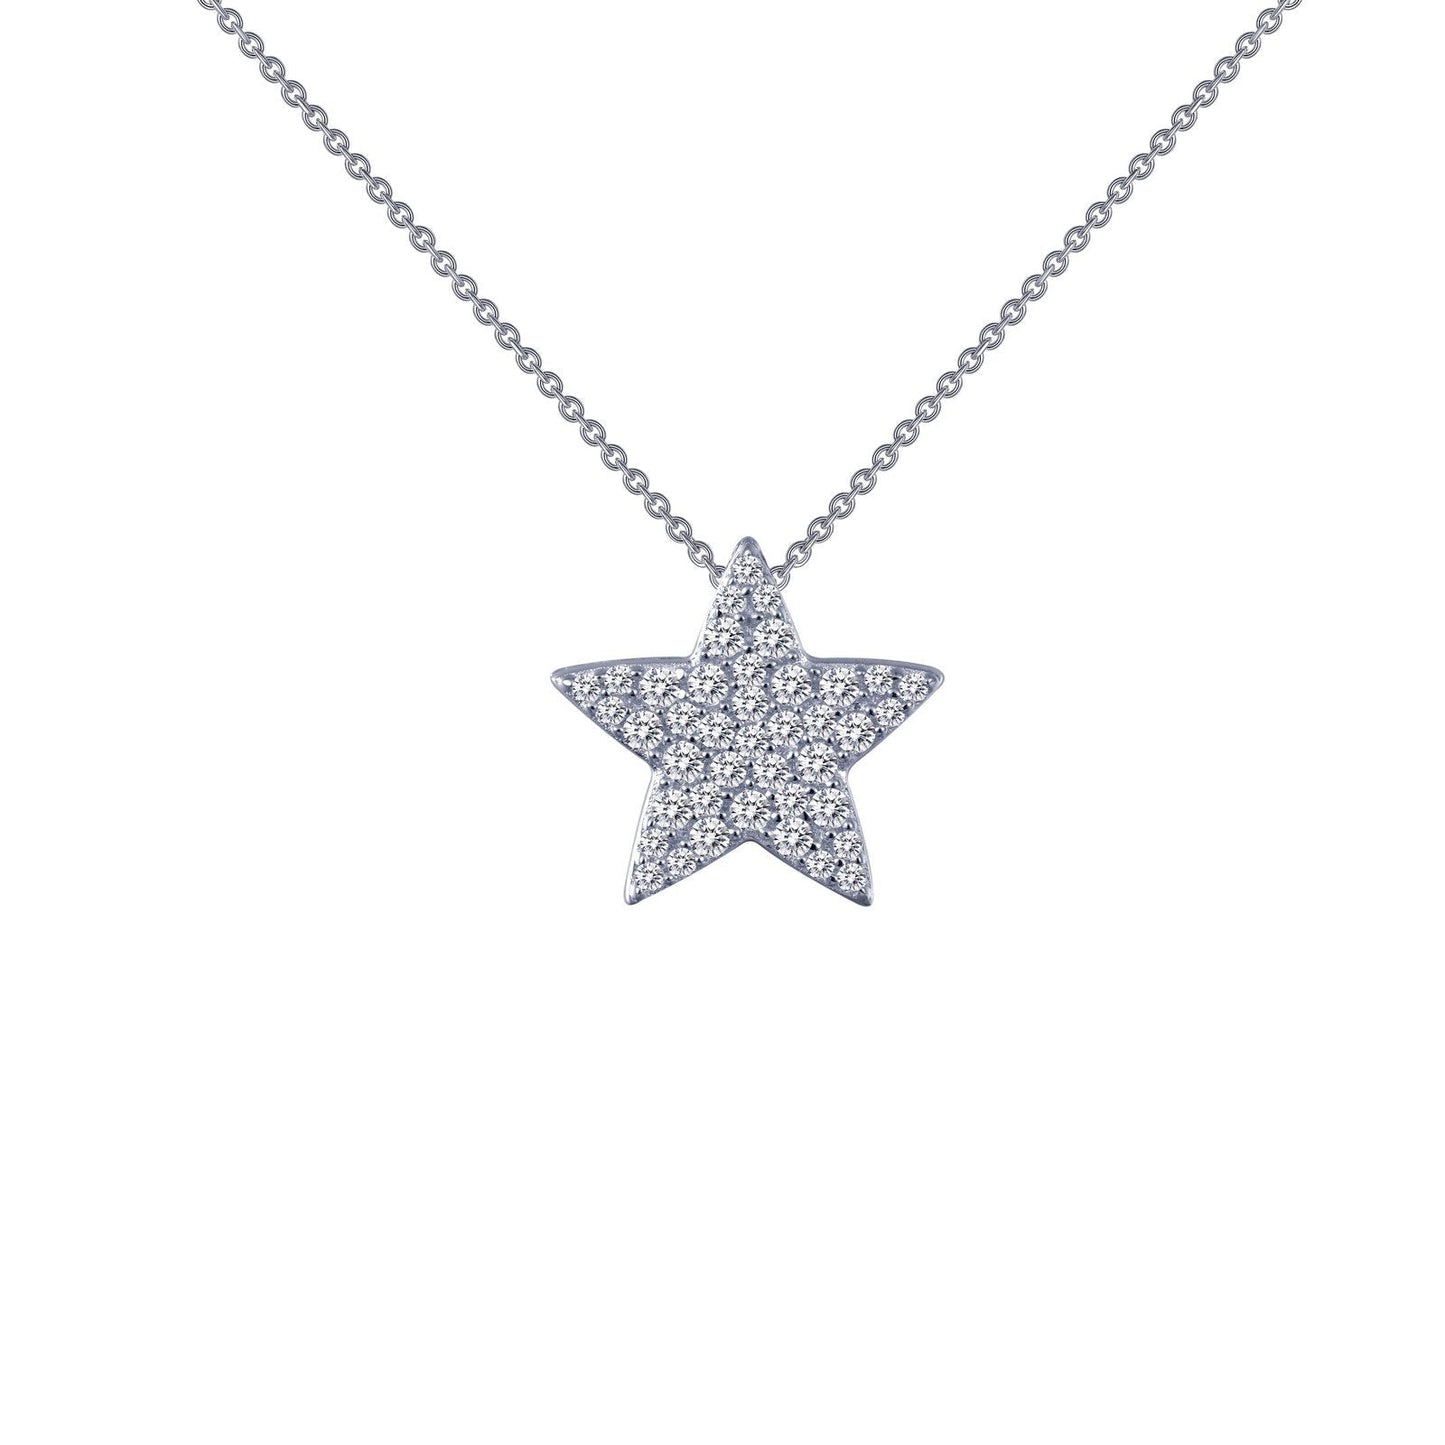 Load image into Gallery viewer, LaFonn Platinum Simulated Diamond N/A NECKLACES 0.41 CTW Star Pendant Necklace
